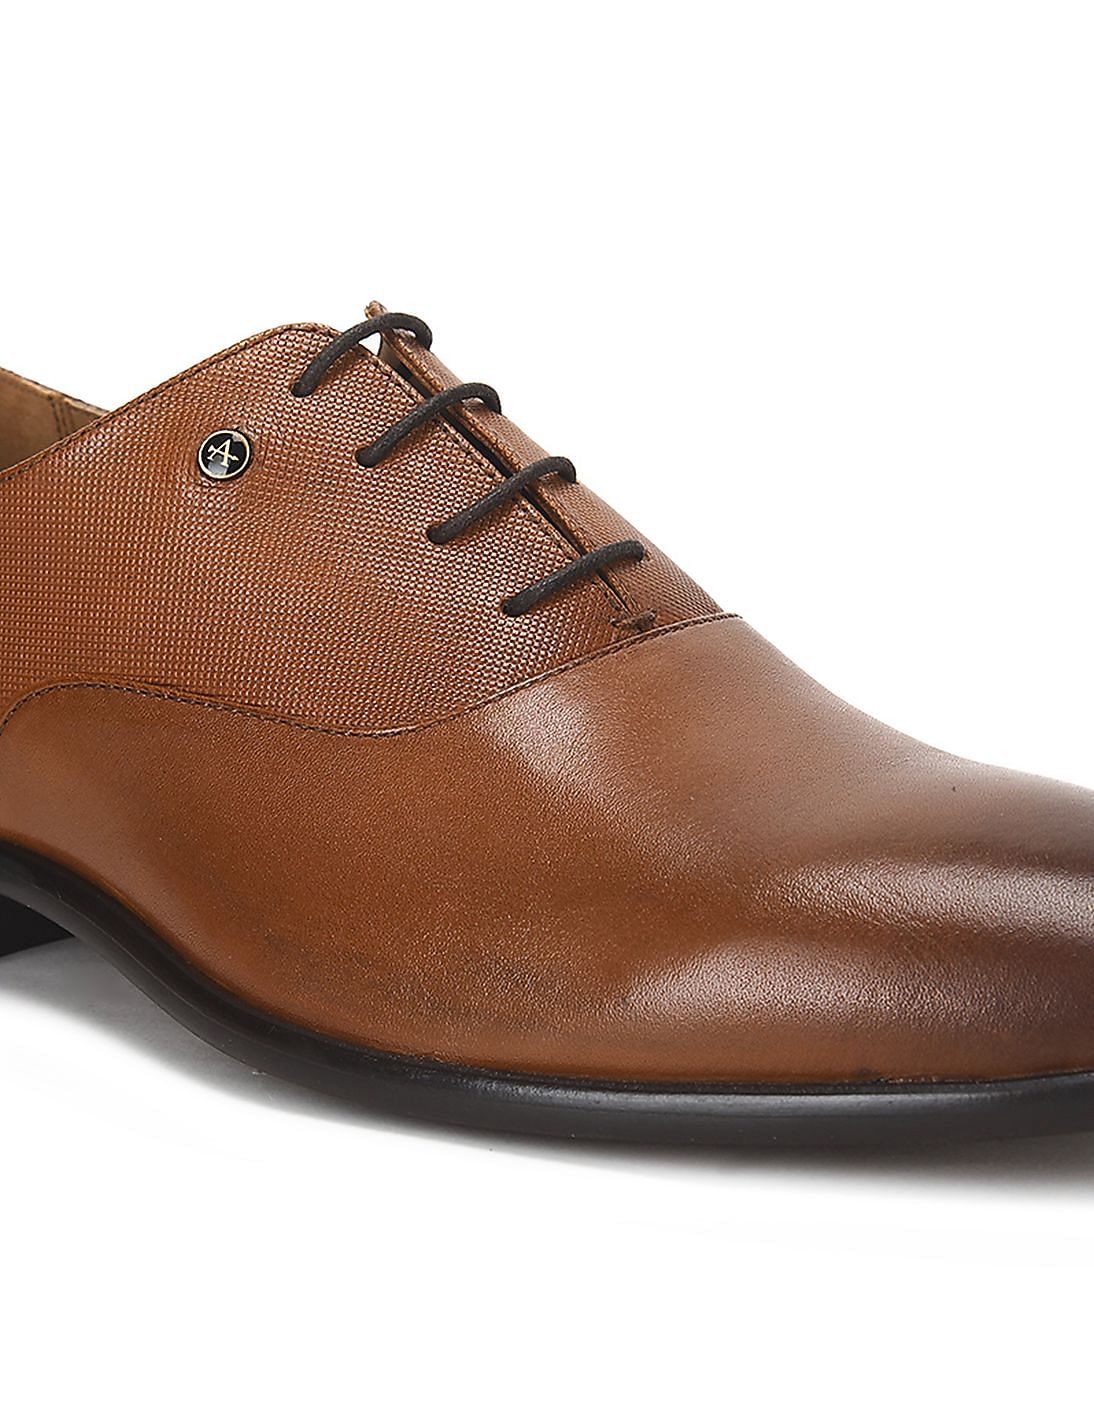 Louis Philippe Formal Shoes : Buy Louis Philippe Brown Lace Up Shoes Online